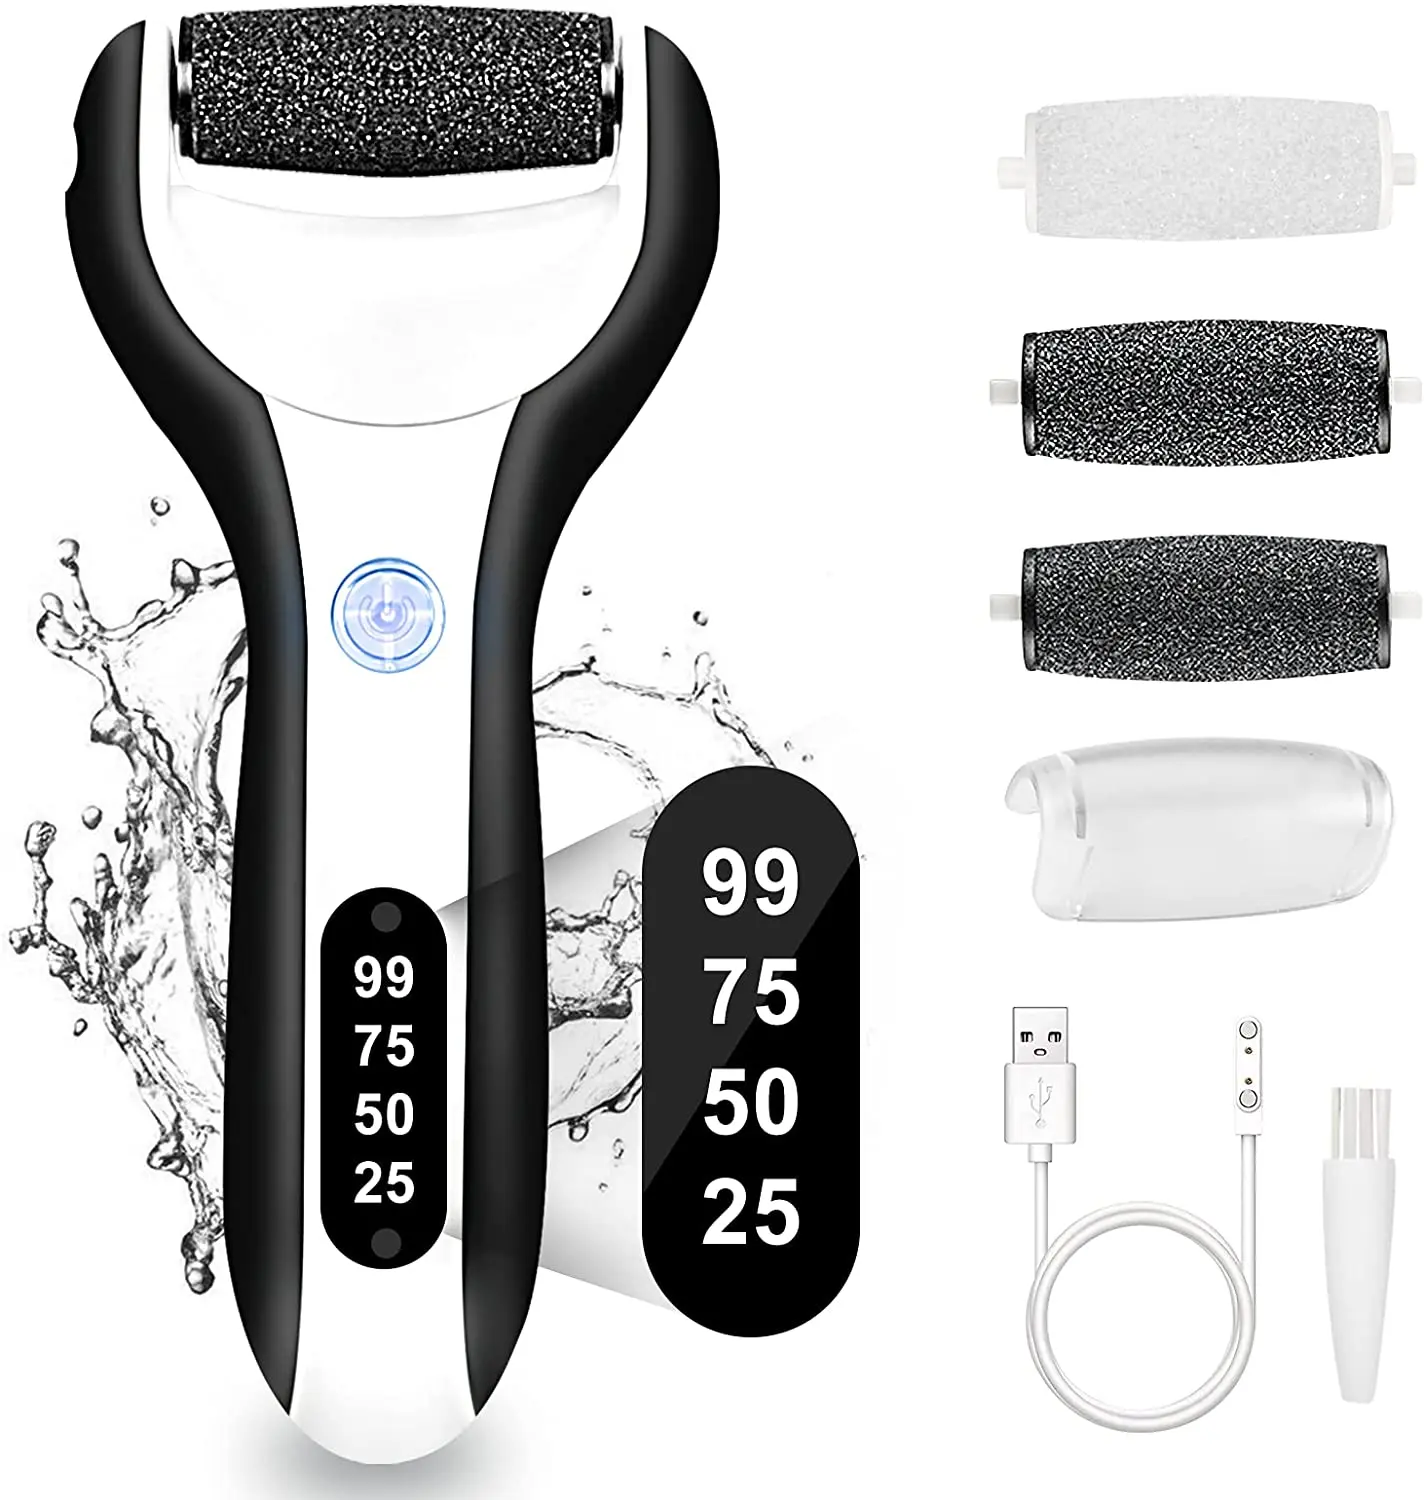 Rechargeable Electric Foot File Callus Remover Machine Pedicure Device Foot Care Tools Feet For Heels Remove Dead Skin black electric feet callus remover rechargeable foot scrubber pedicure tools for removing dead skin callus feet file hard cracked skin